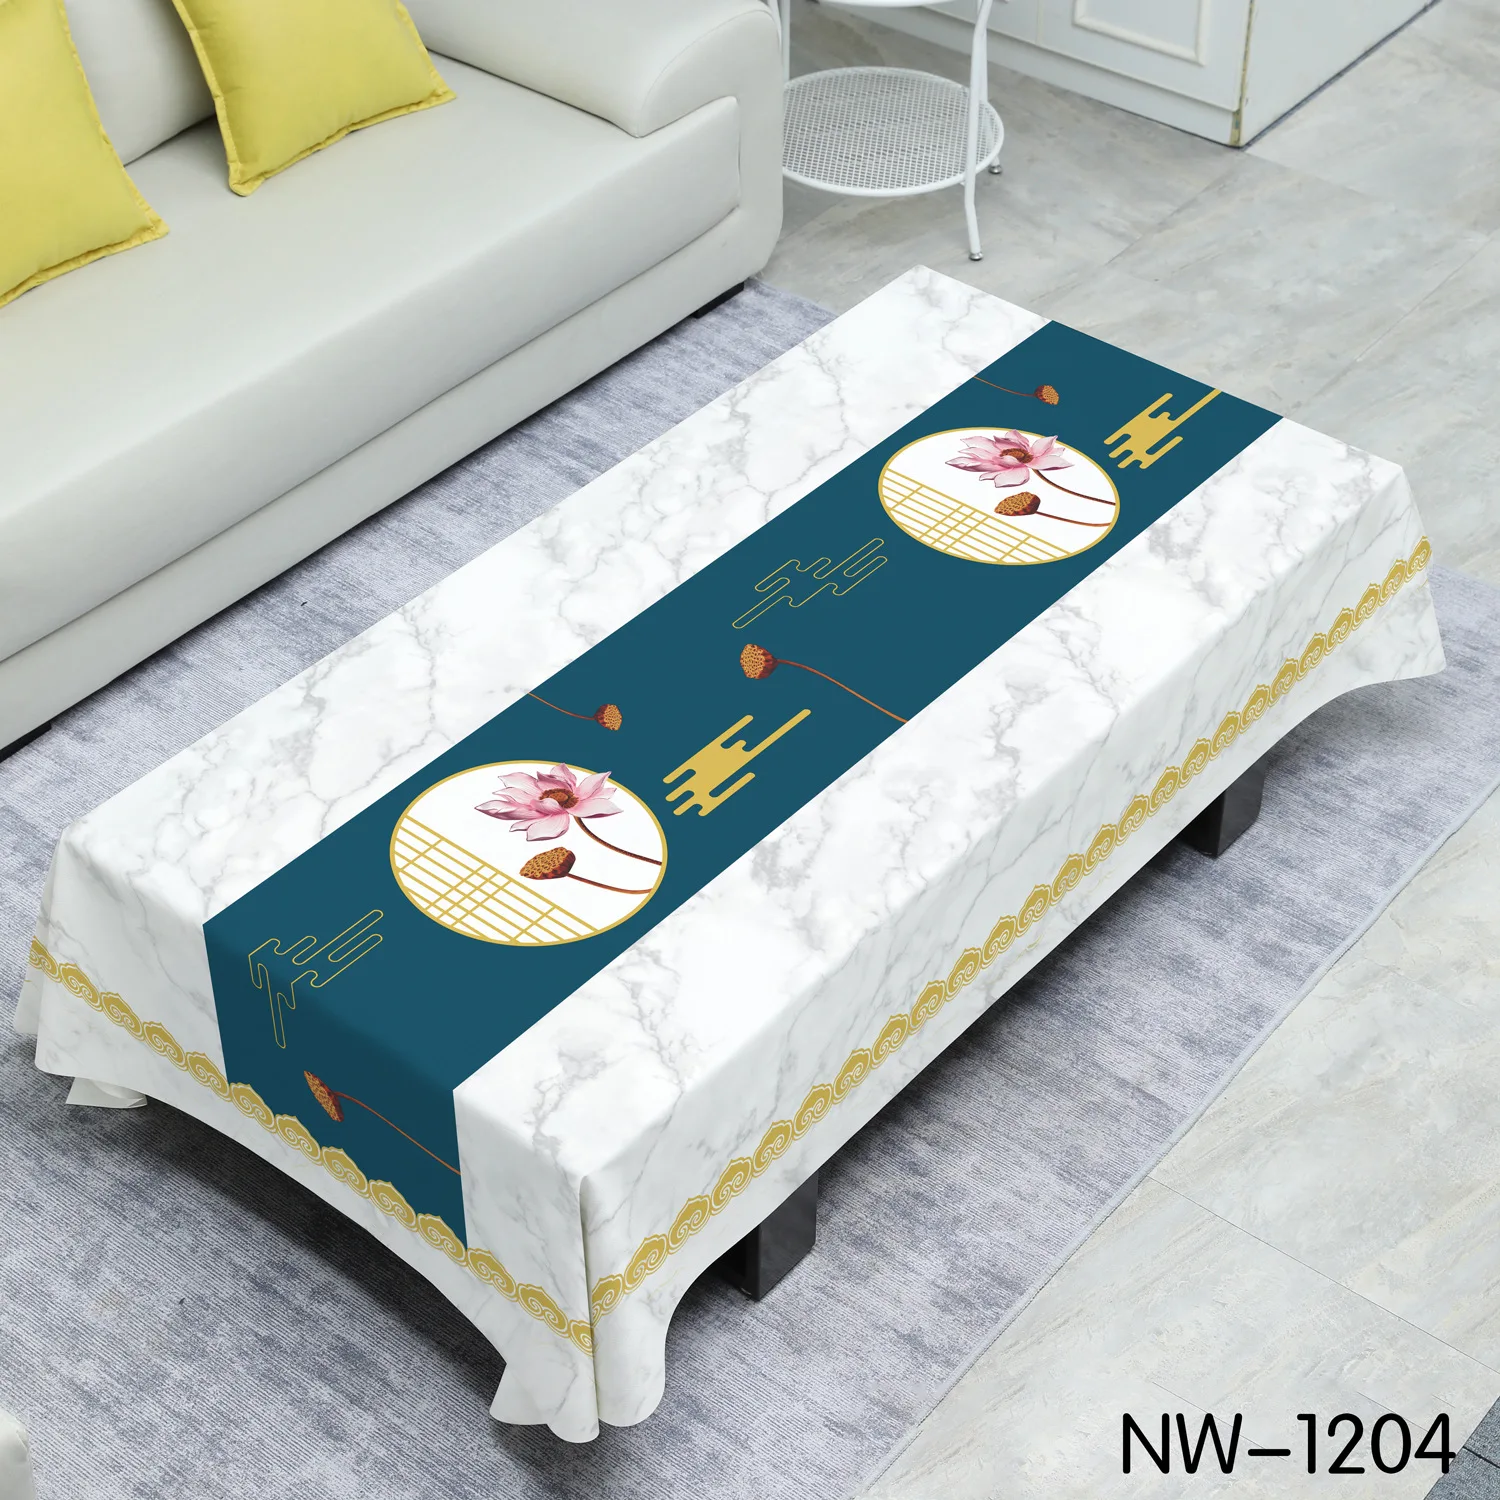 

C95Anti-slip coffee table tablecloth waterproof and oil-proof no-wash rectangular high-end living room tablecloth